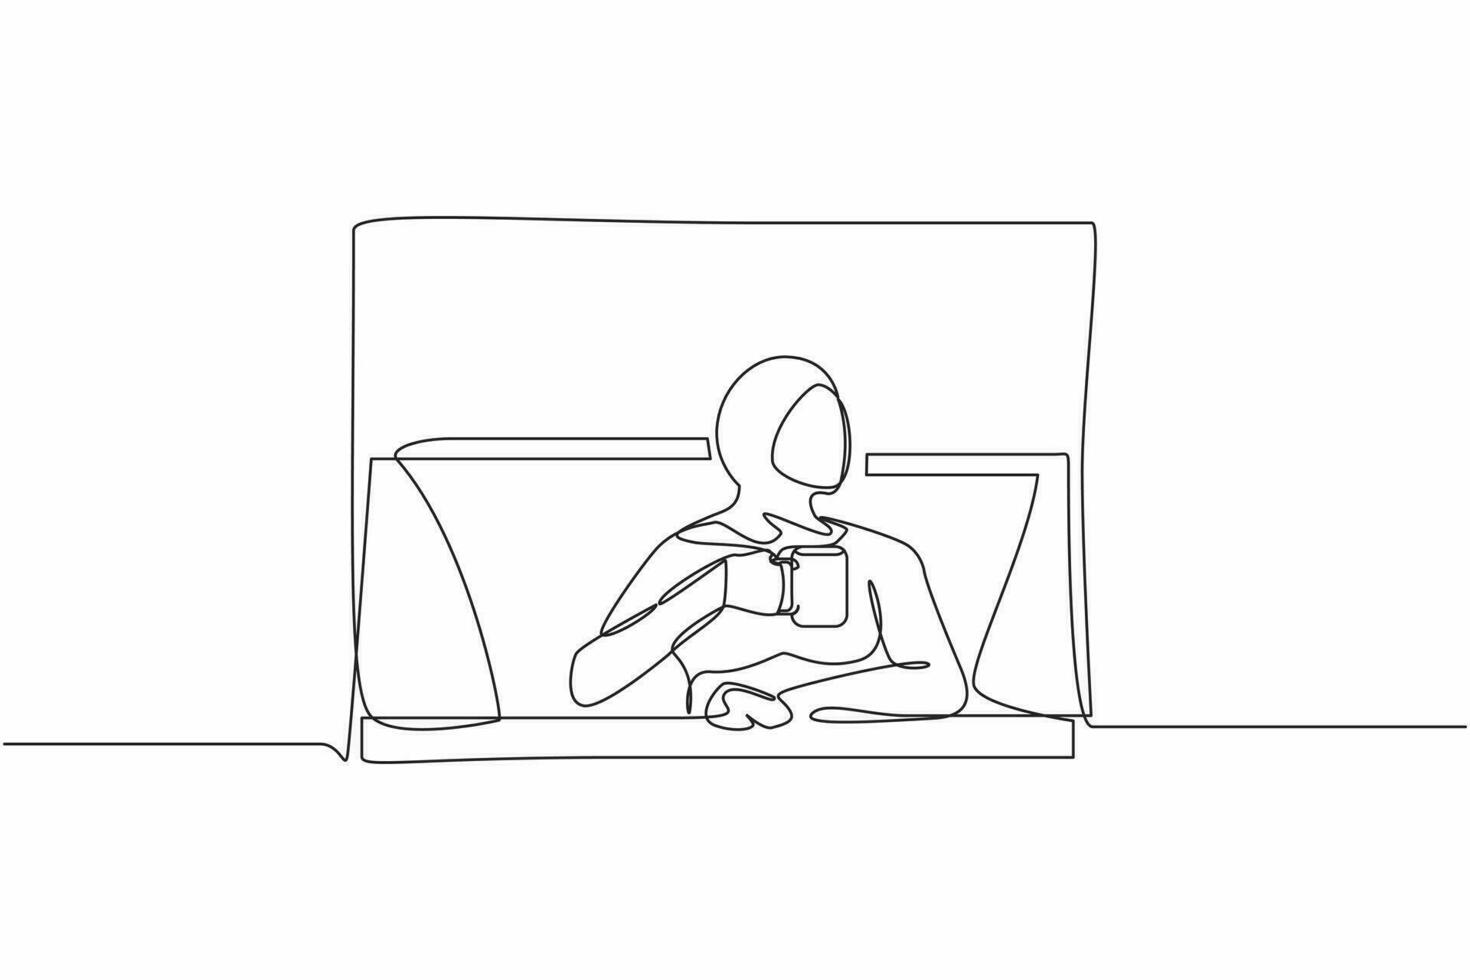 Continuous one line drawing young Arab woman enjoy hot coffee or tea. Female holding mug and looking outside through window while sitting on windowsill. Single line design vector graphic illustration